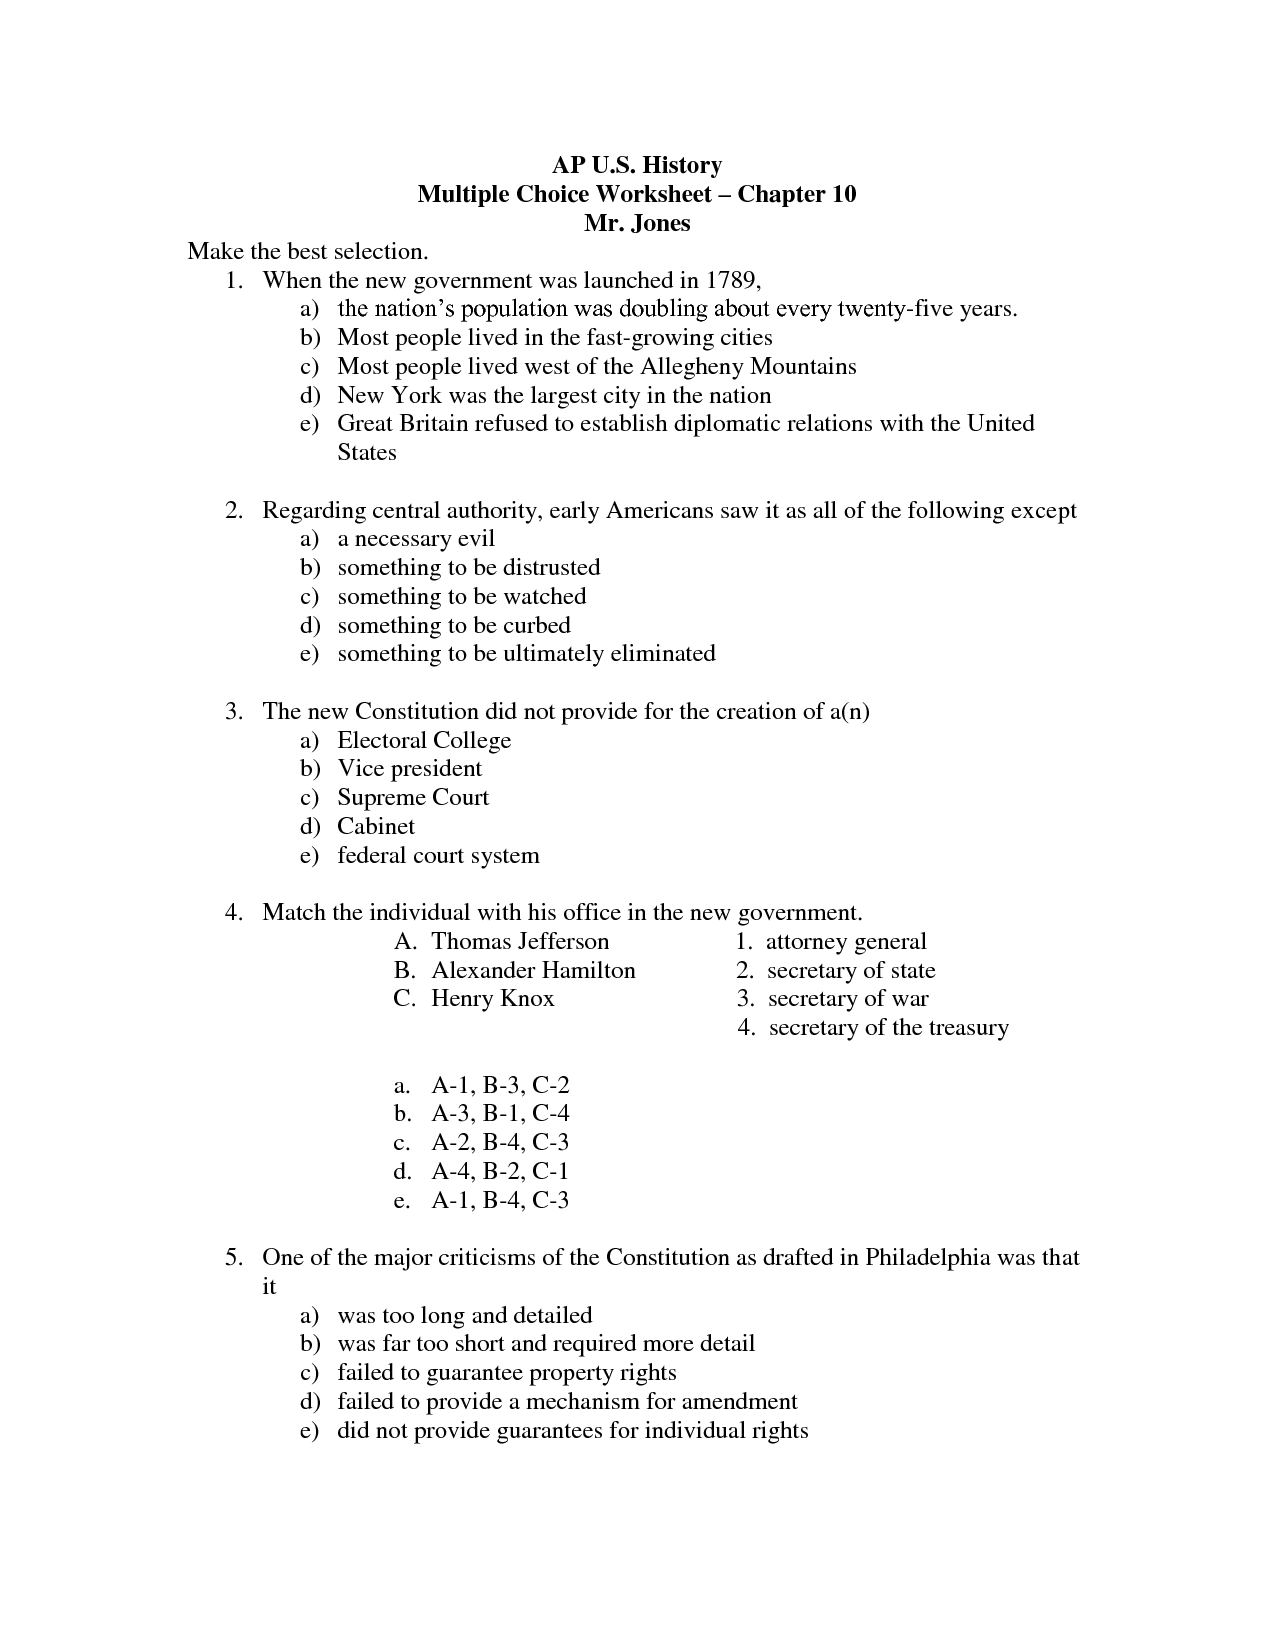 13-best-images-of-ap-us-history-worksheets-world-history-lesson-plan-activities-ap-chemistry